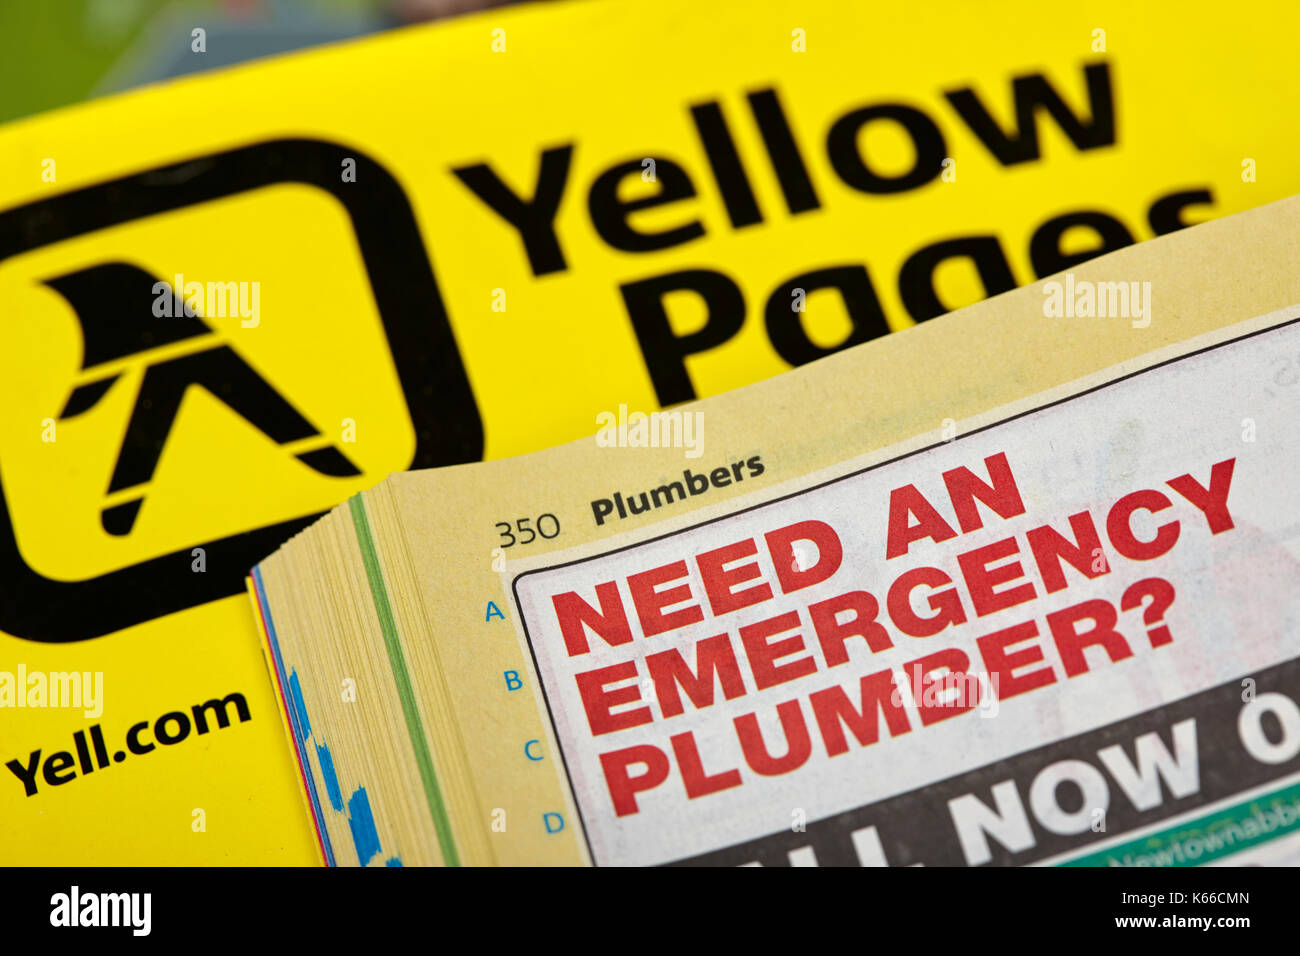 plumbers section of small single entry business listings in yellow pages classified telephone directory paper edition uk Stock Photo